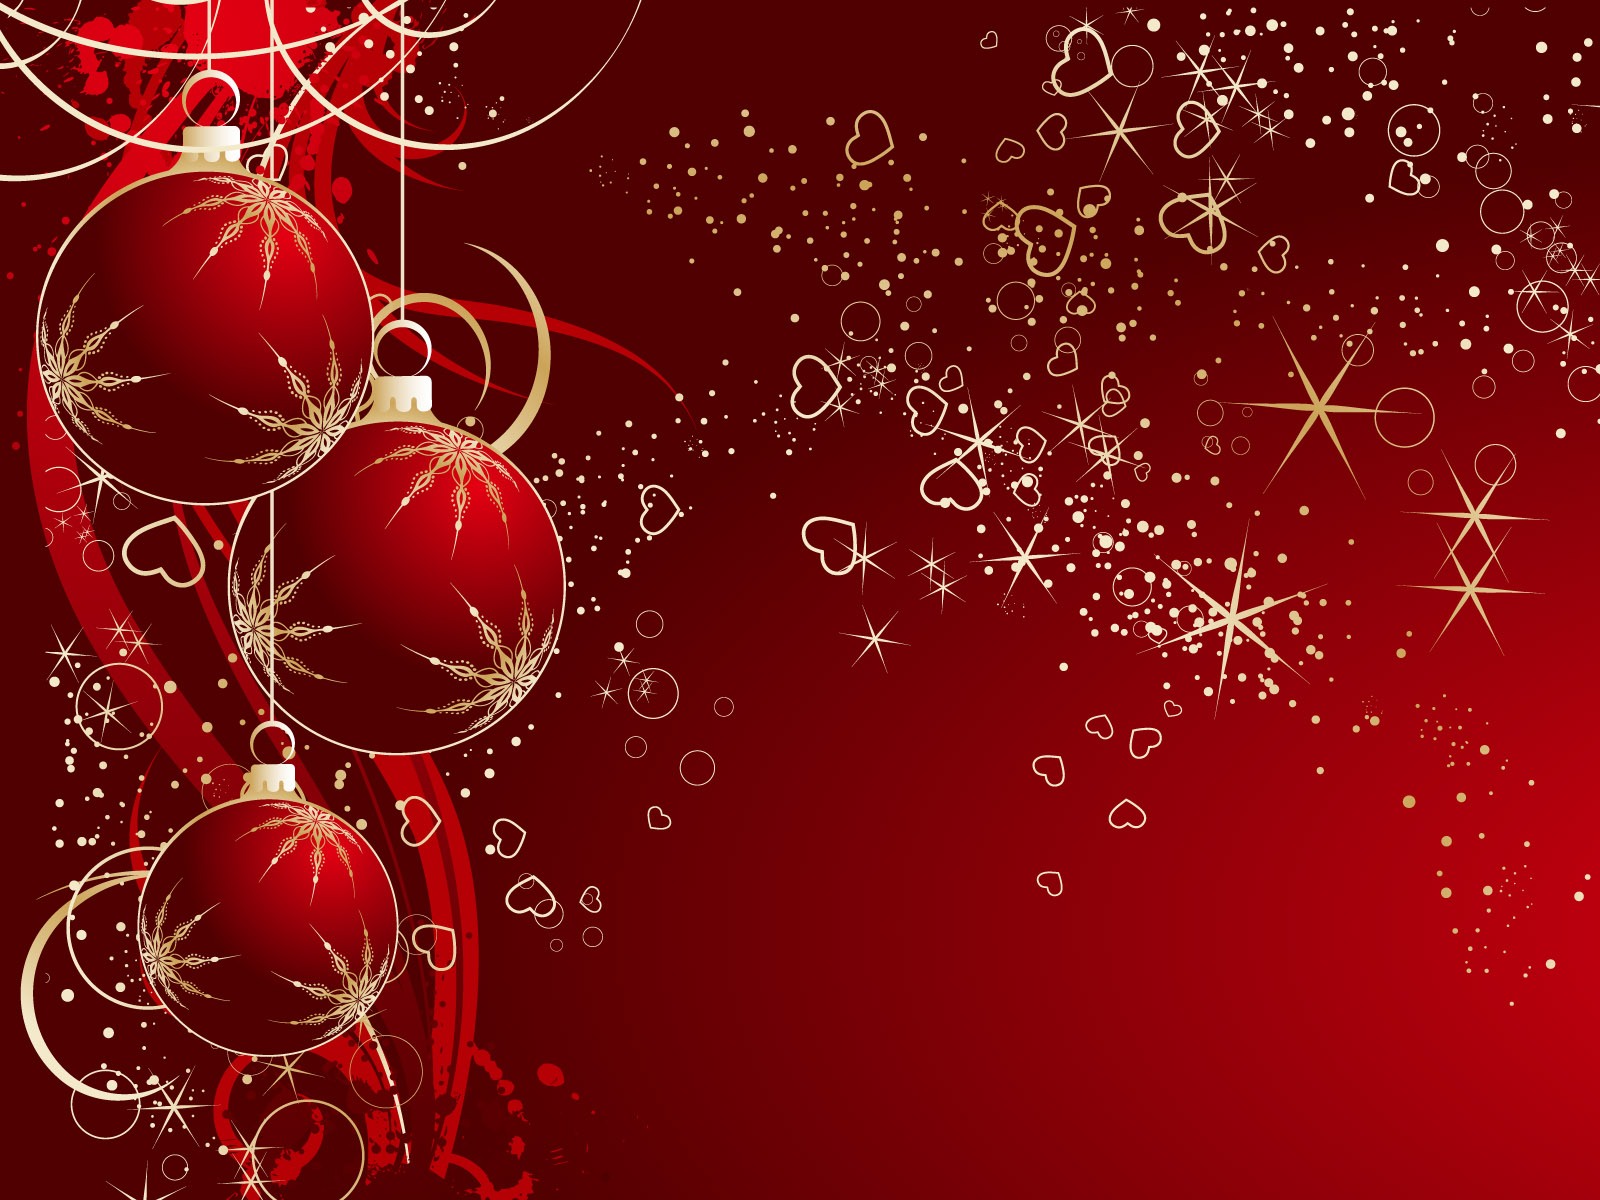 Your Puter S Desktop With Red Christmas Background